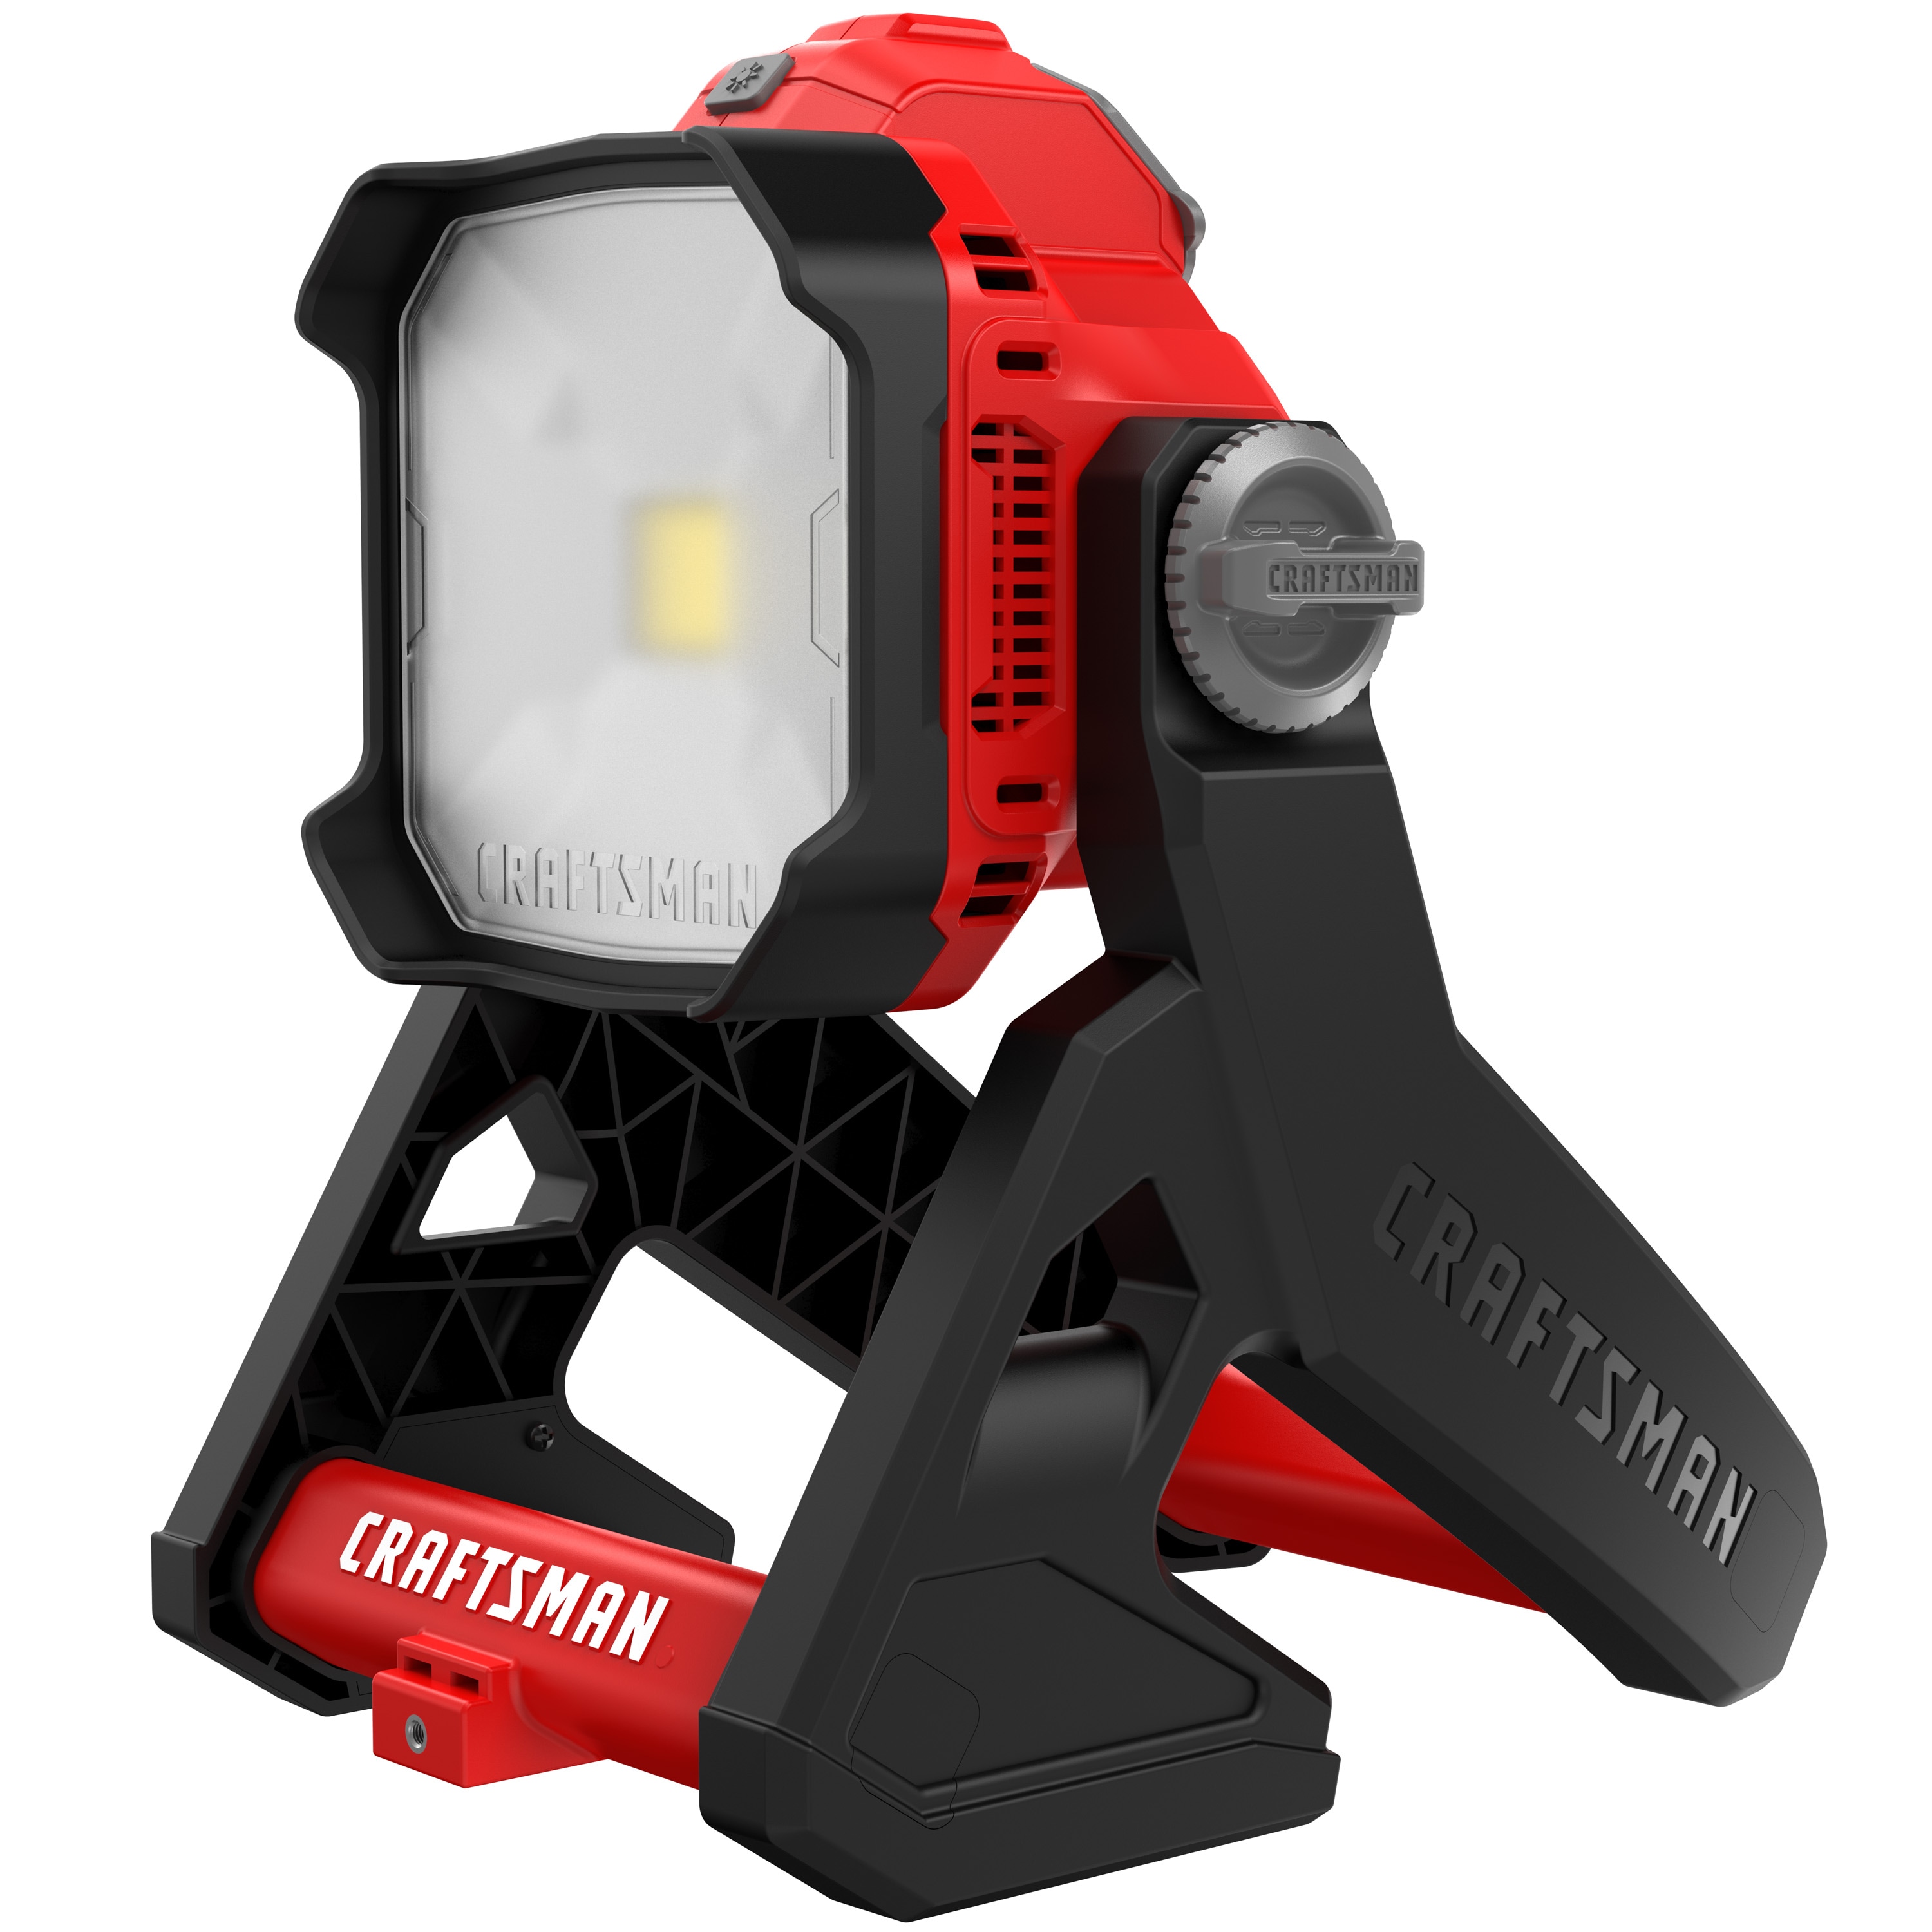 CRAFTSMAN V20 20-volt Max Ion (li-ion) Corded & Cordless 1825-Lumen Rechargeable Power Tool Flashlight in the Power Tool Flashlights at Lowes.com